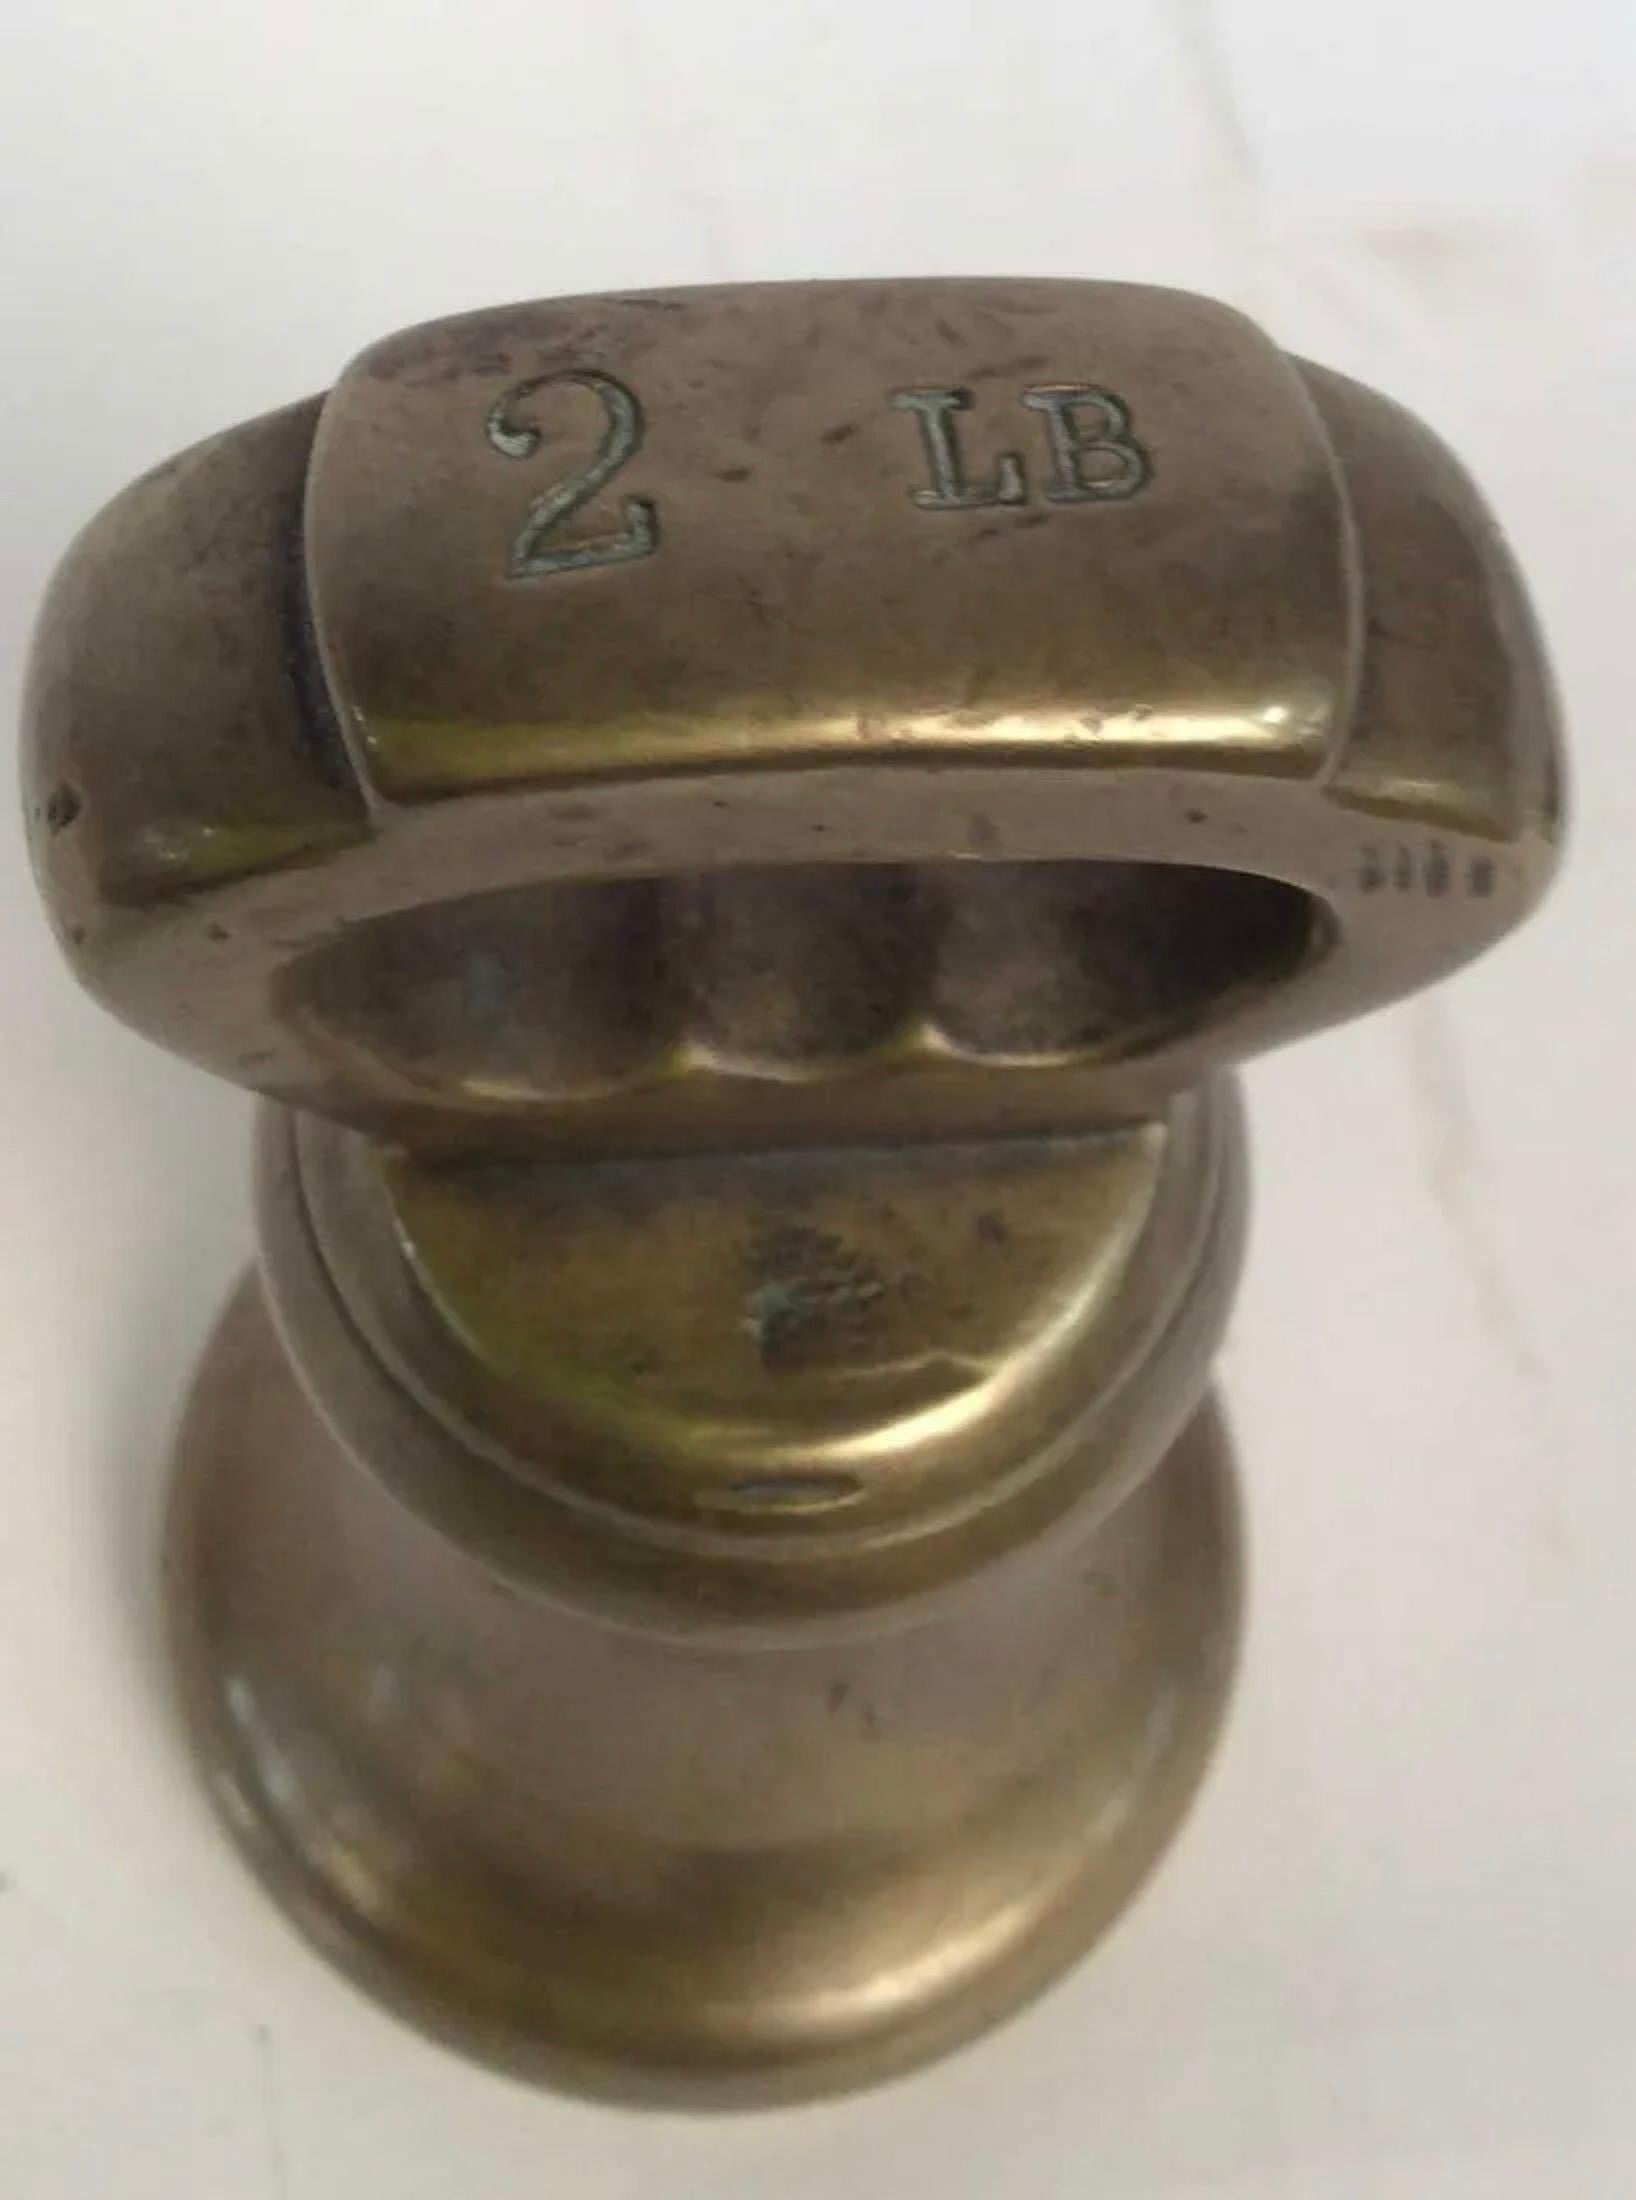 Antique bell shaped brass 2 LB grocers weight, marked 2 Lb on top. The weight can make a wonderful paper weight, decorative sculpture or door stopper.
Search terms: Antique brass weights, brass accessories, antique grocers utensils, decorative